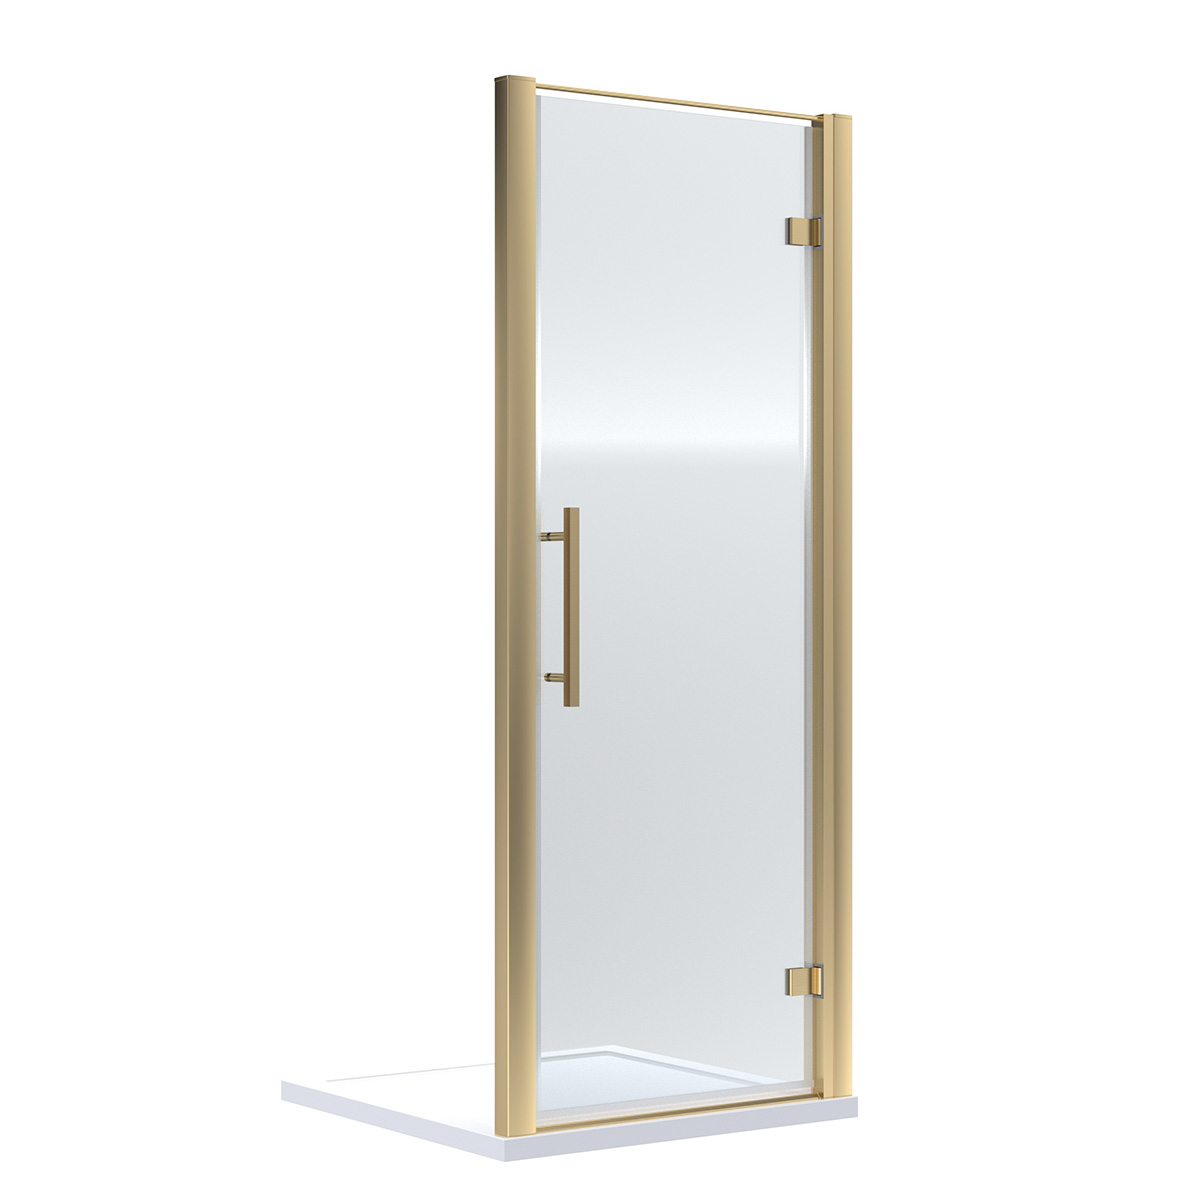 Hudson Reed 800mm Hinged Shower Door with Square Handle - Brushed Brass